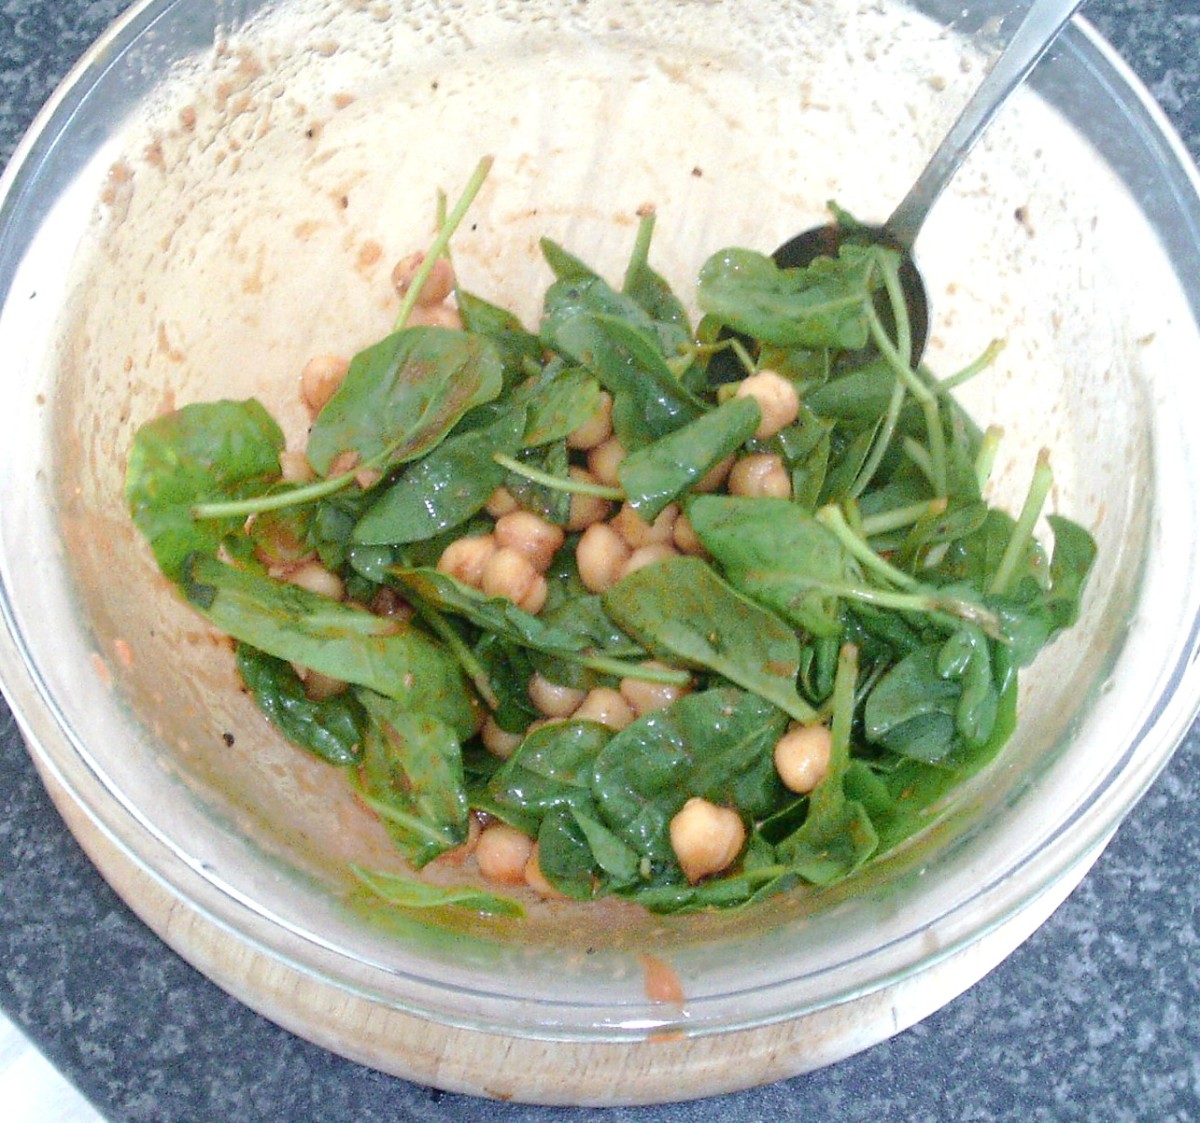 Spinach is stirred in to chickpeas in tomato sauce